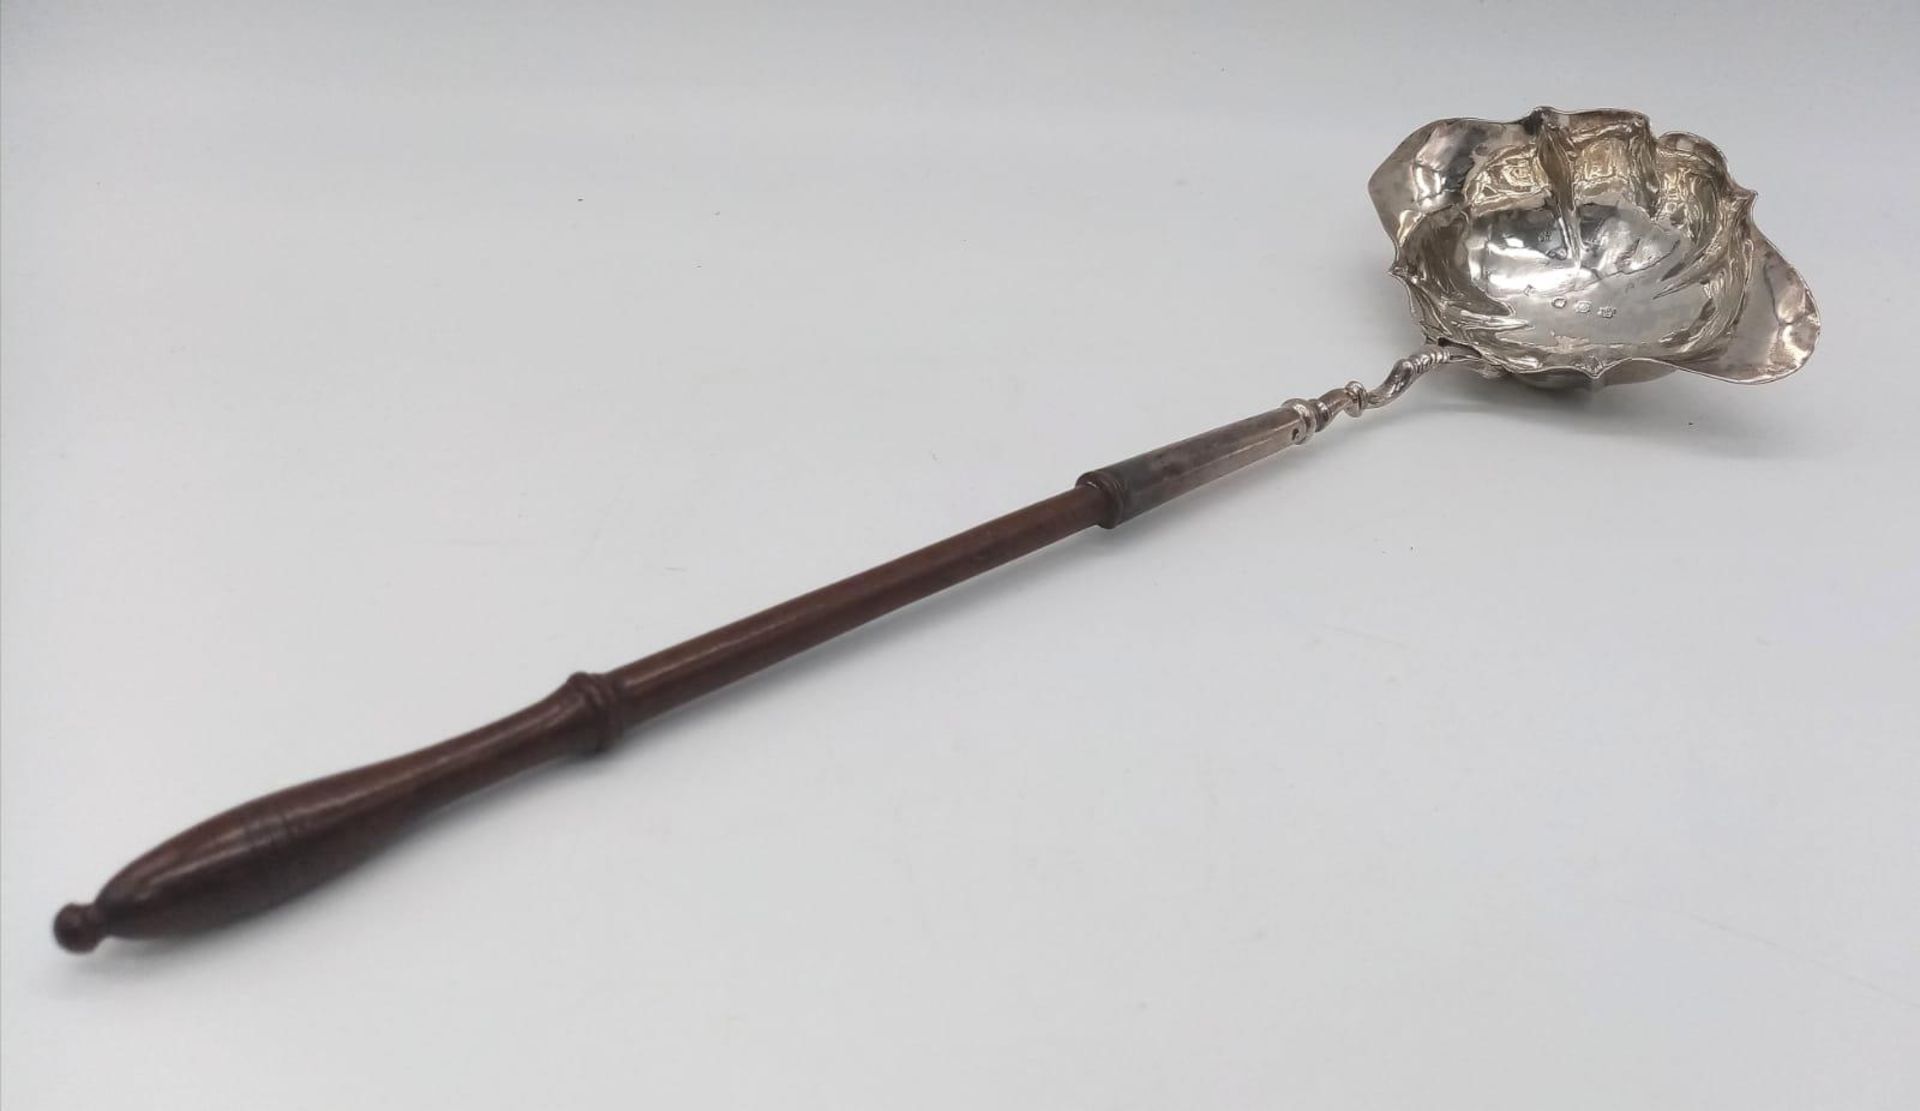 A GEORGIAN SILVER PUNCH LADLE CIRCA 1810 AND MADE IN LONDON , WEIGHING 66.8gms and 30cms IN LENGTH ,